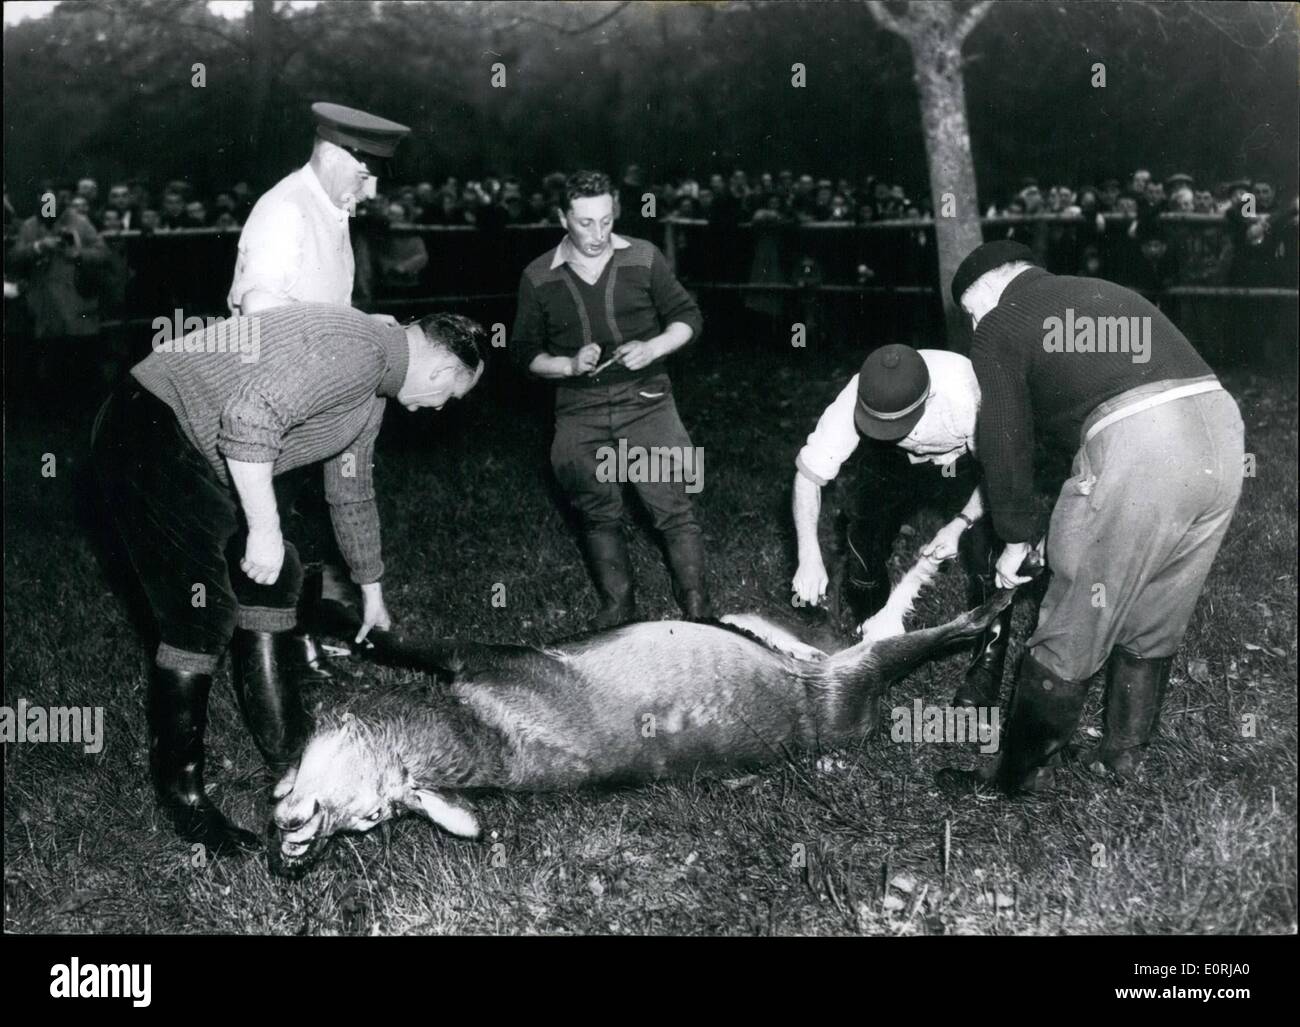 Nov. 11, 1959 - Rothschild's Daughter Lds Stag Hunt In The Compiegne Forest... Madame Halphen, daughter of Baron James de Rothschild, led the Stag Hunt held by her father in the compiegne Forest, fifty miles for Paris, recently. Photo Shows: The stag is prepared for dia-embowelling. Stock Photo